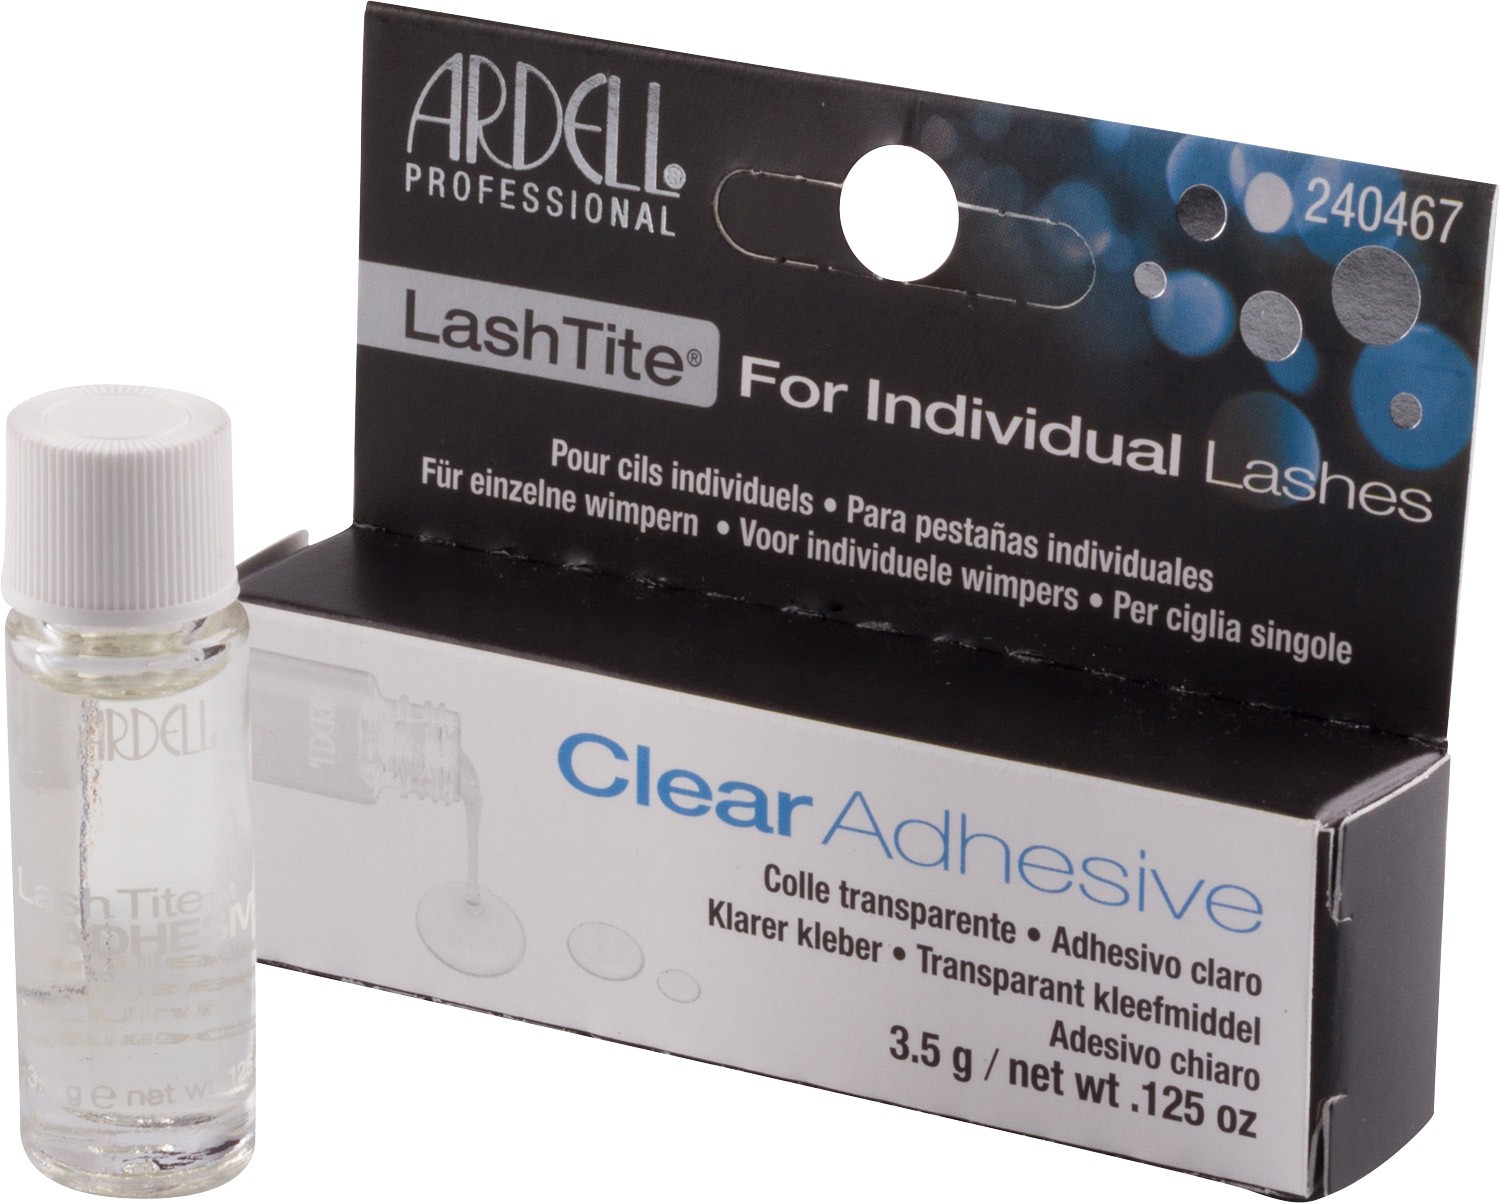 How To Use Ardell Lashtite Clear Adhesive